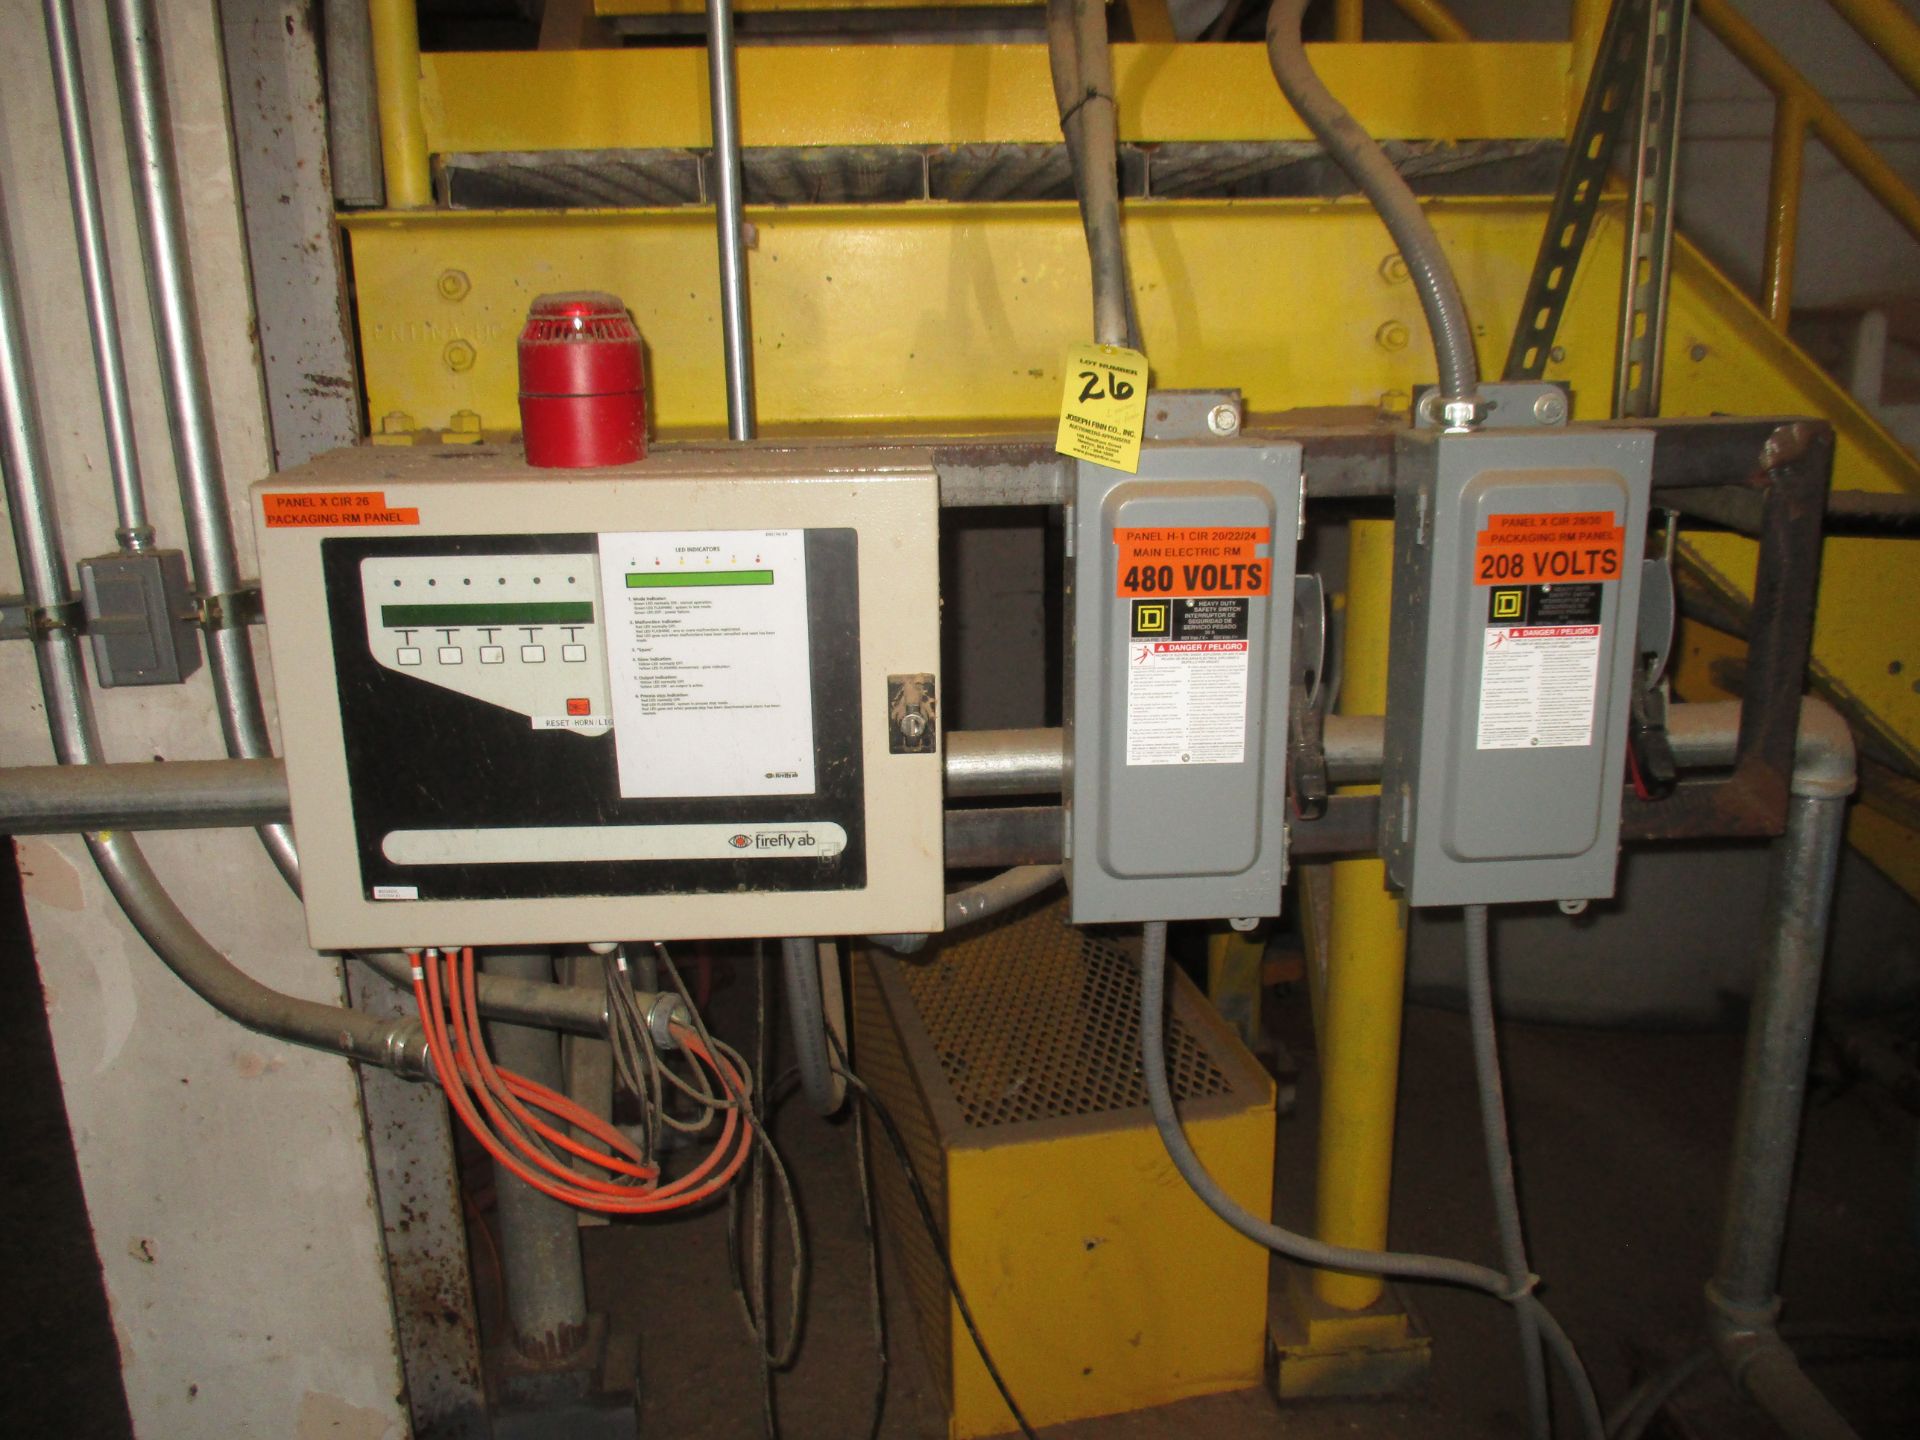 Firefly AB In Process Fire Suppression System w/Spark Detectors, Auto Deluge